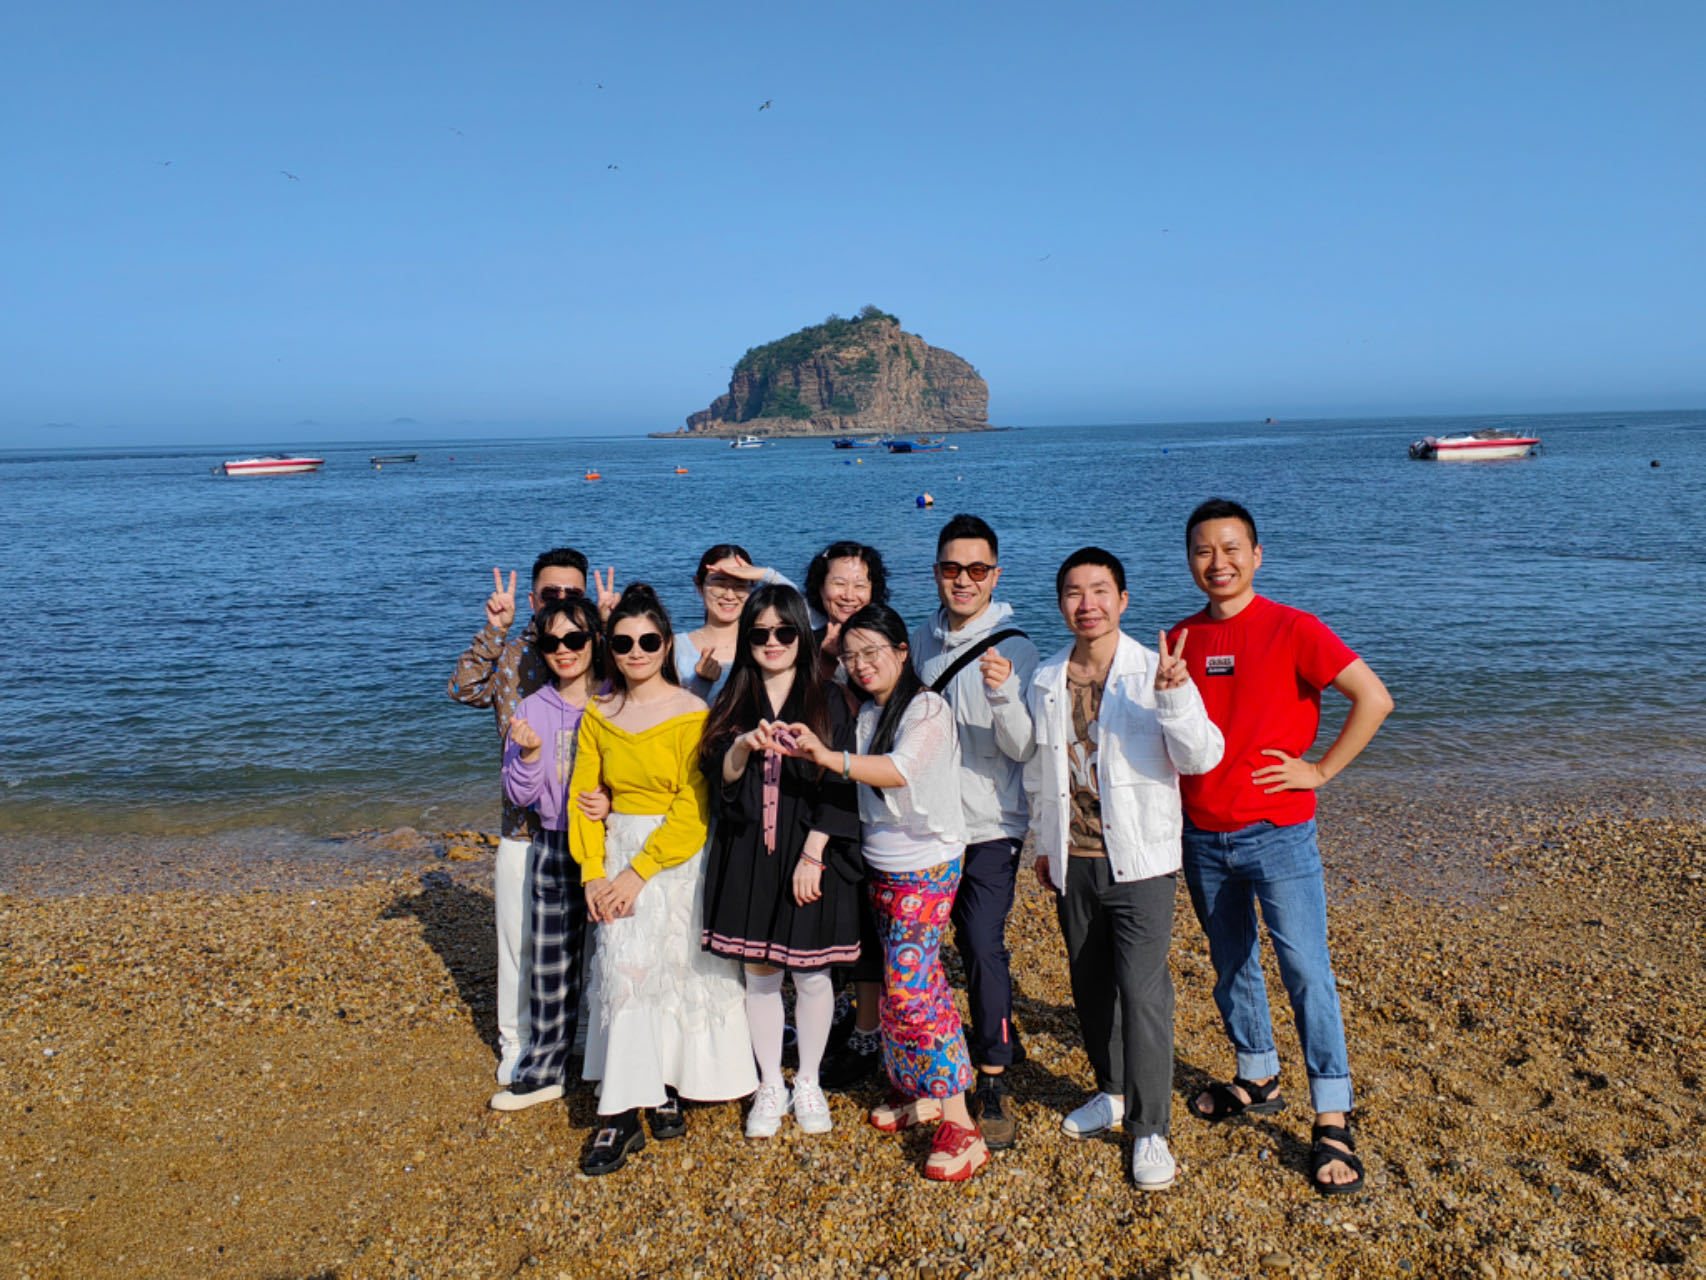 Fineland Sales Team Tour in Dalian city, Liaoning Province